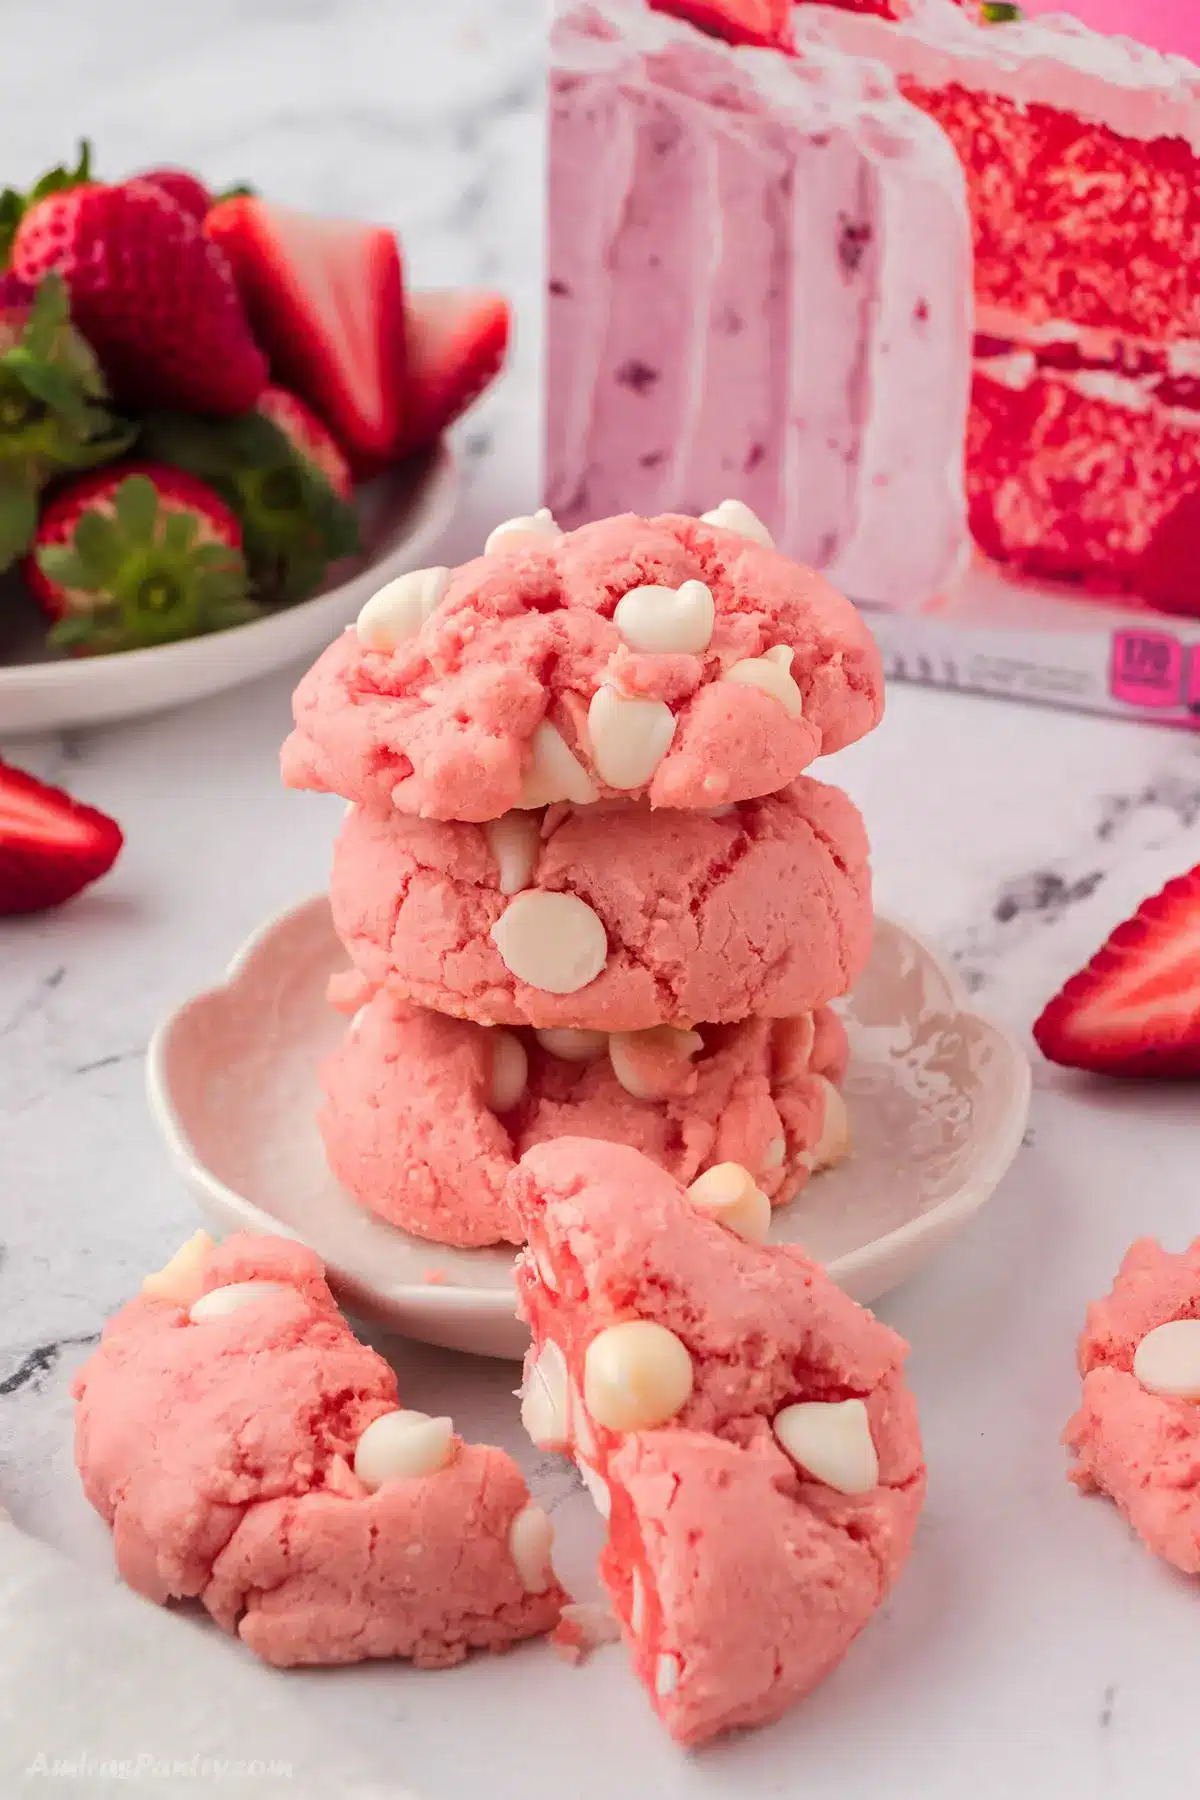 A stack of strawberry cake mix cookies with one cut in hlaf.